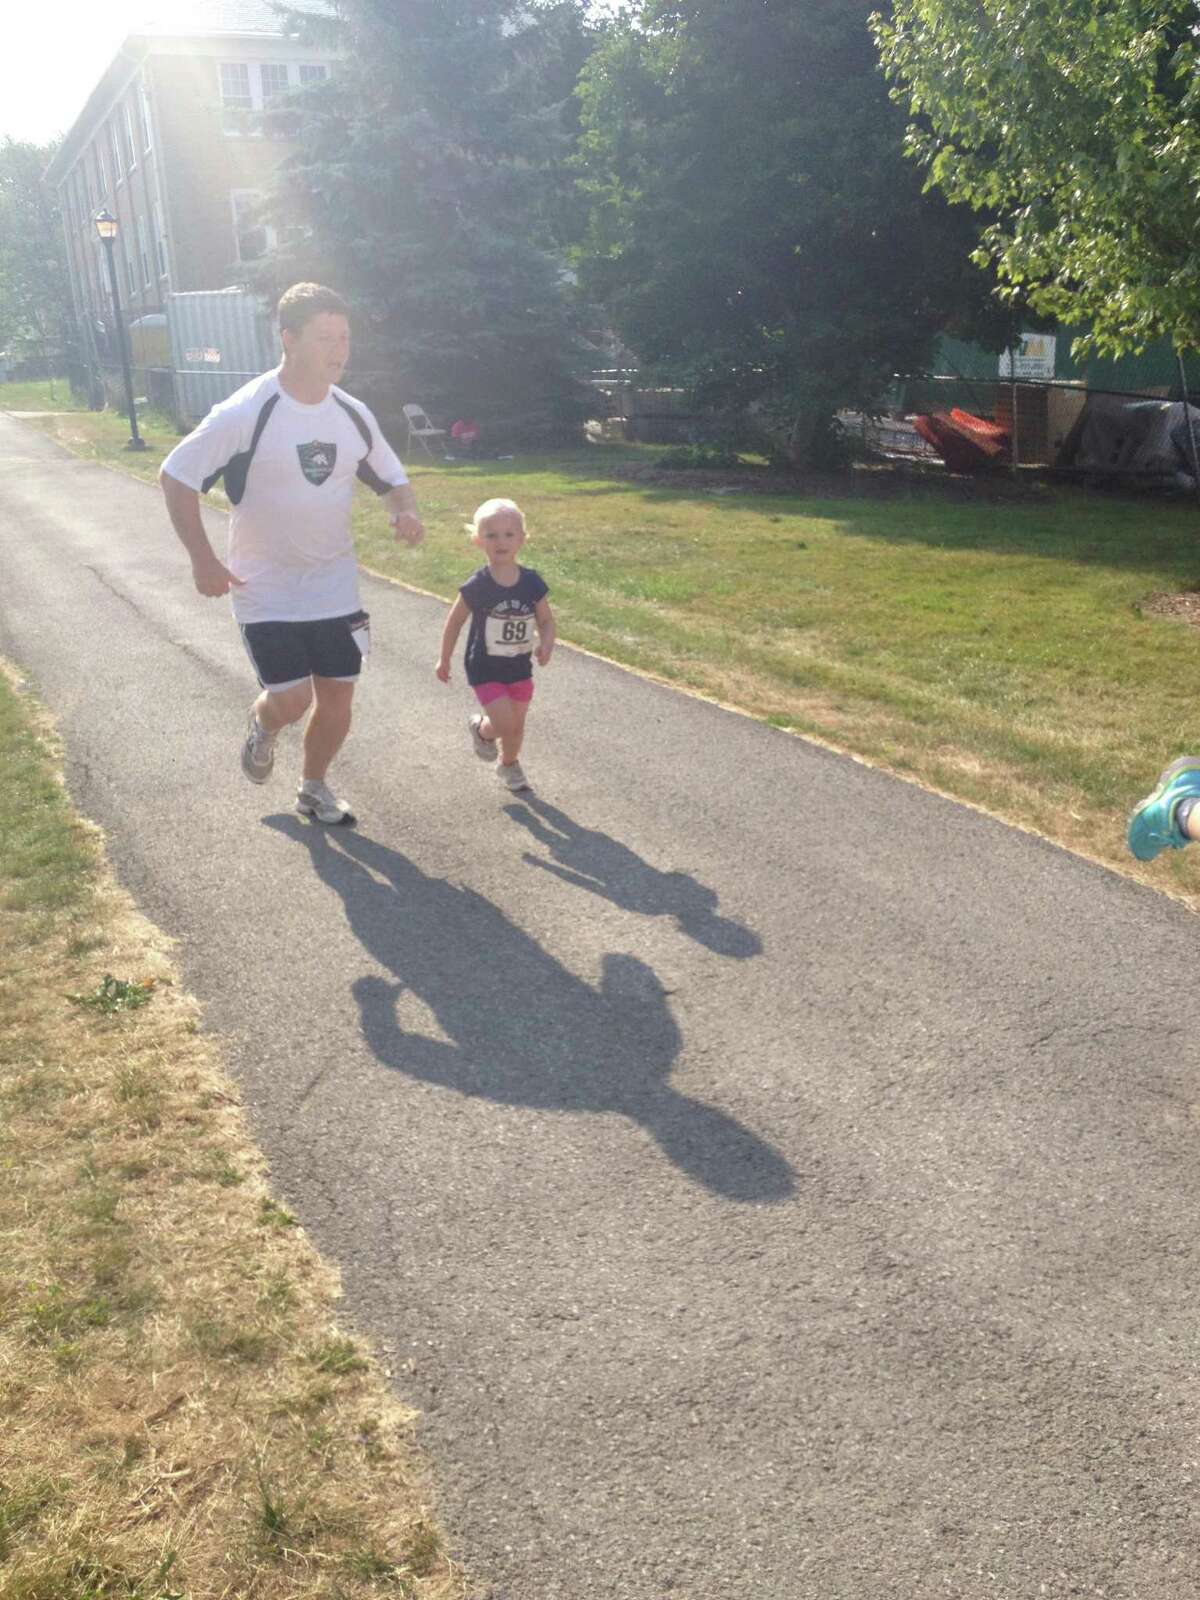 Kyle Graves and his daughter Dalaney approach the finish line at the Fun Run at Morrisville State College on July 14, 2012. Submitted Photo